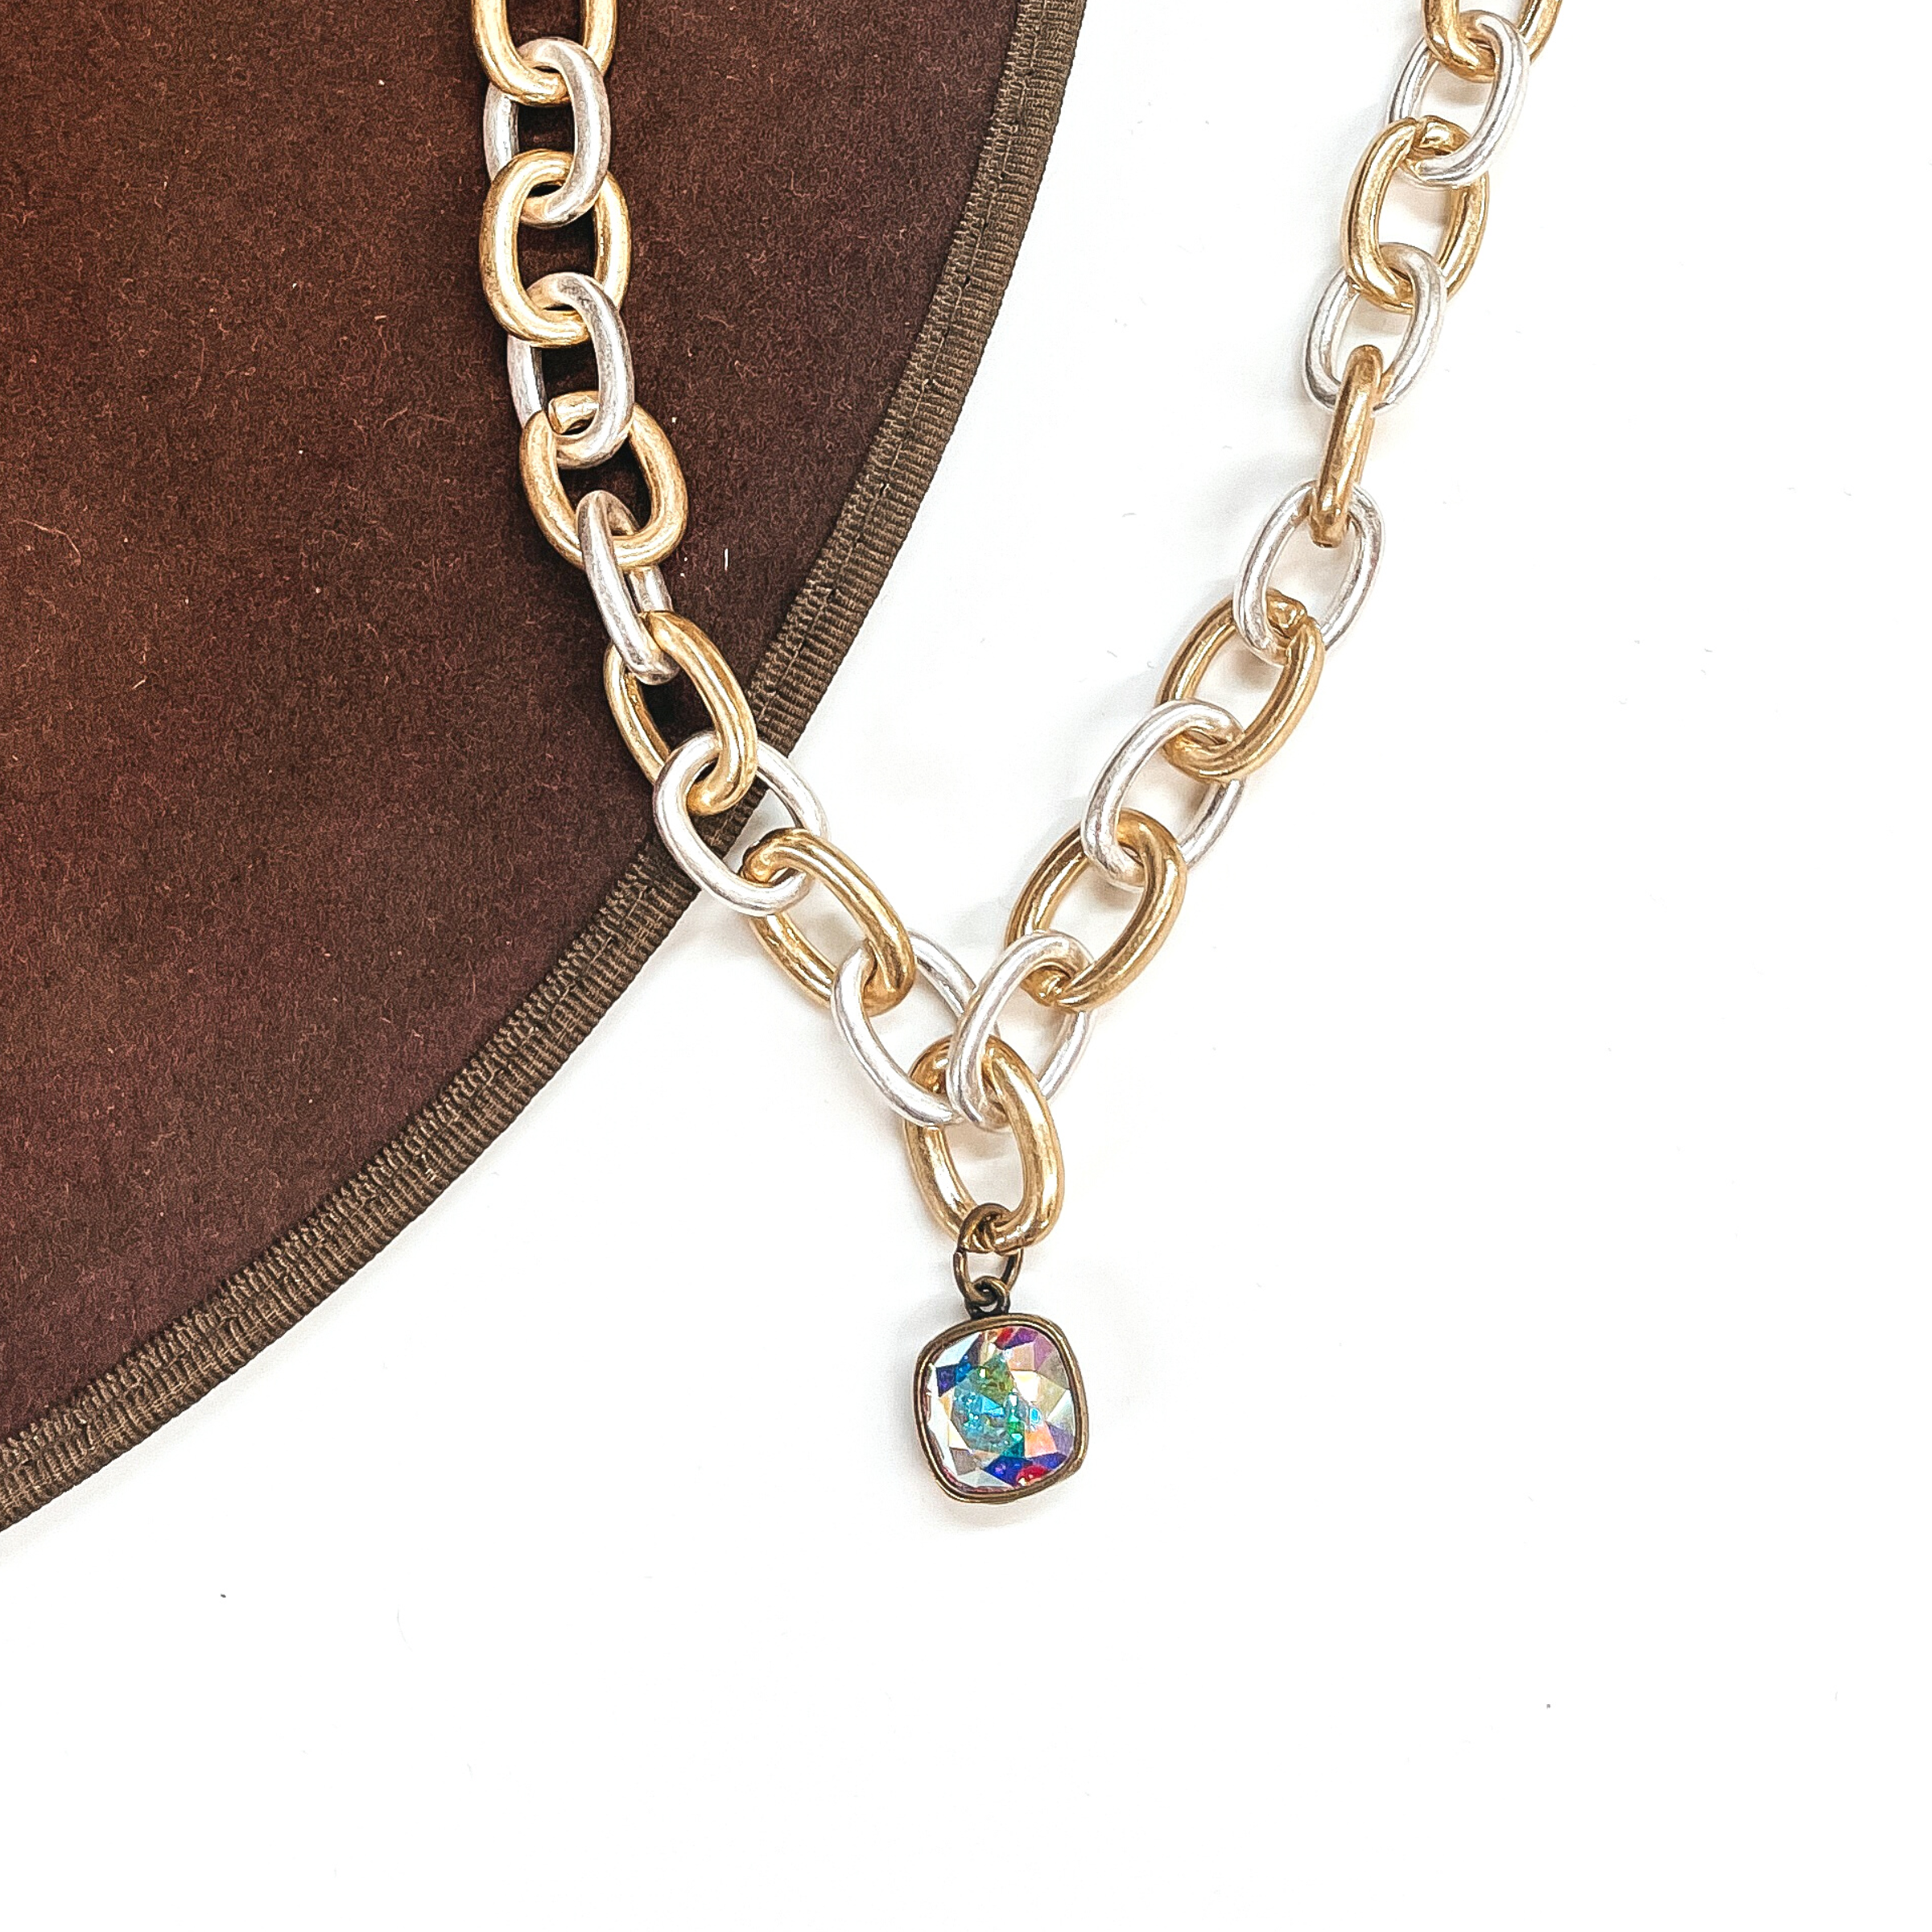 This is silver and gold tone thick linked chain necklace with an AB cushion cut crystal  charm in a bronze setting. This necklace is taken laying on a dark brown hat brim  and on a white background.